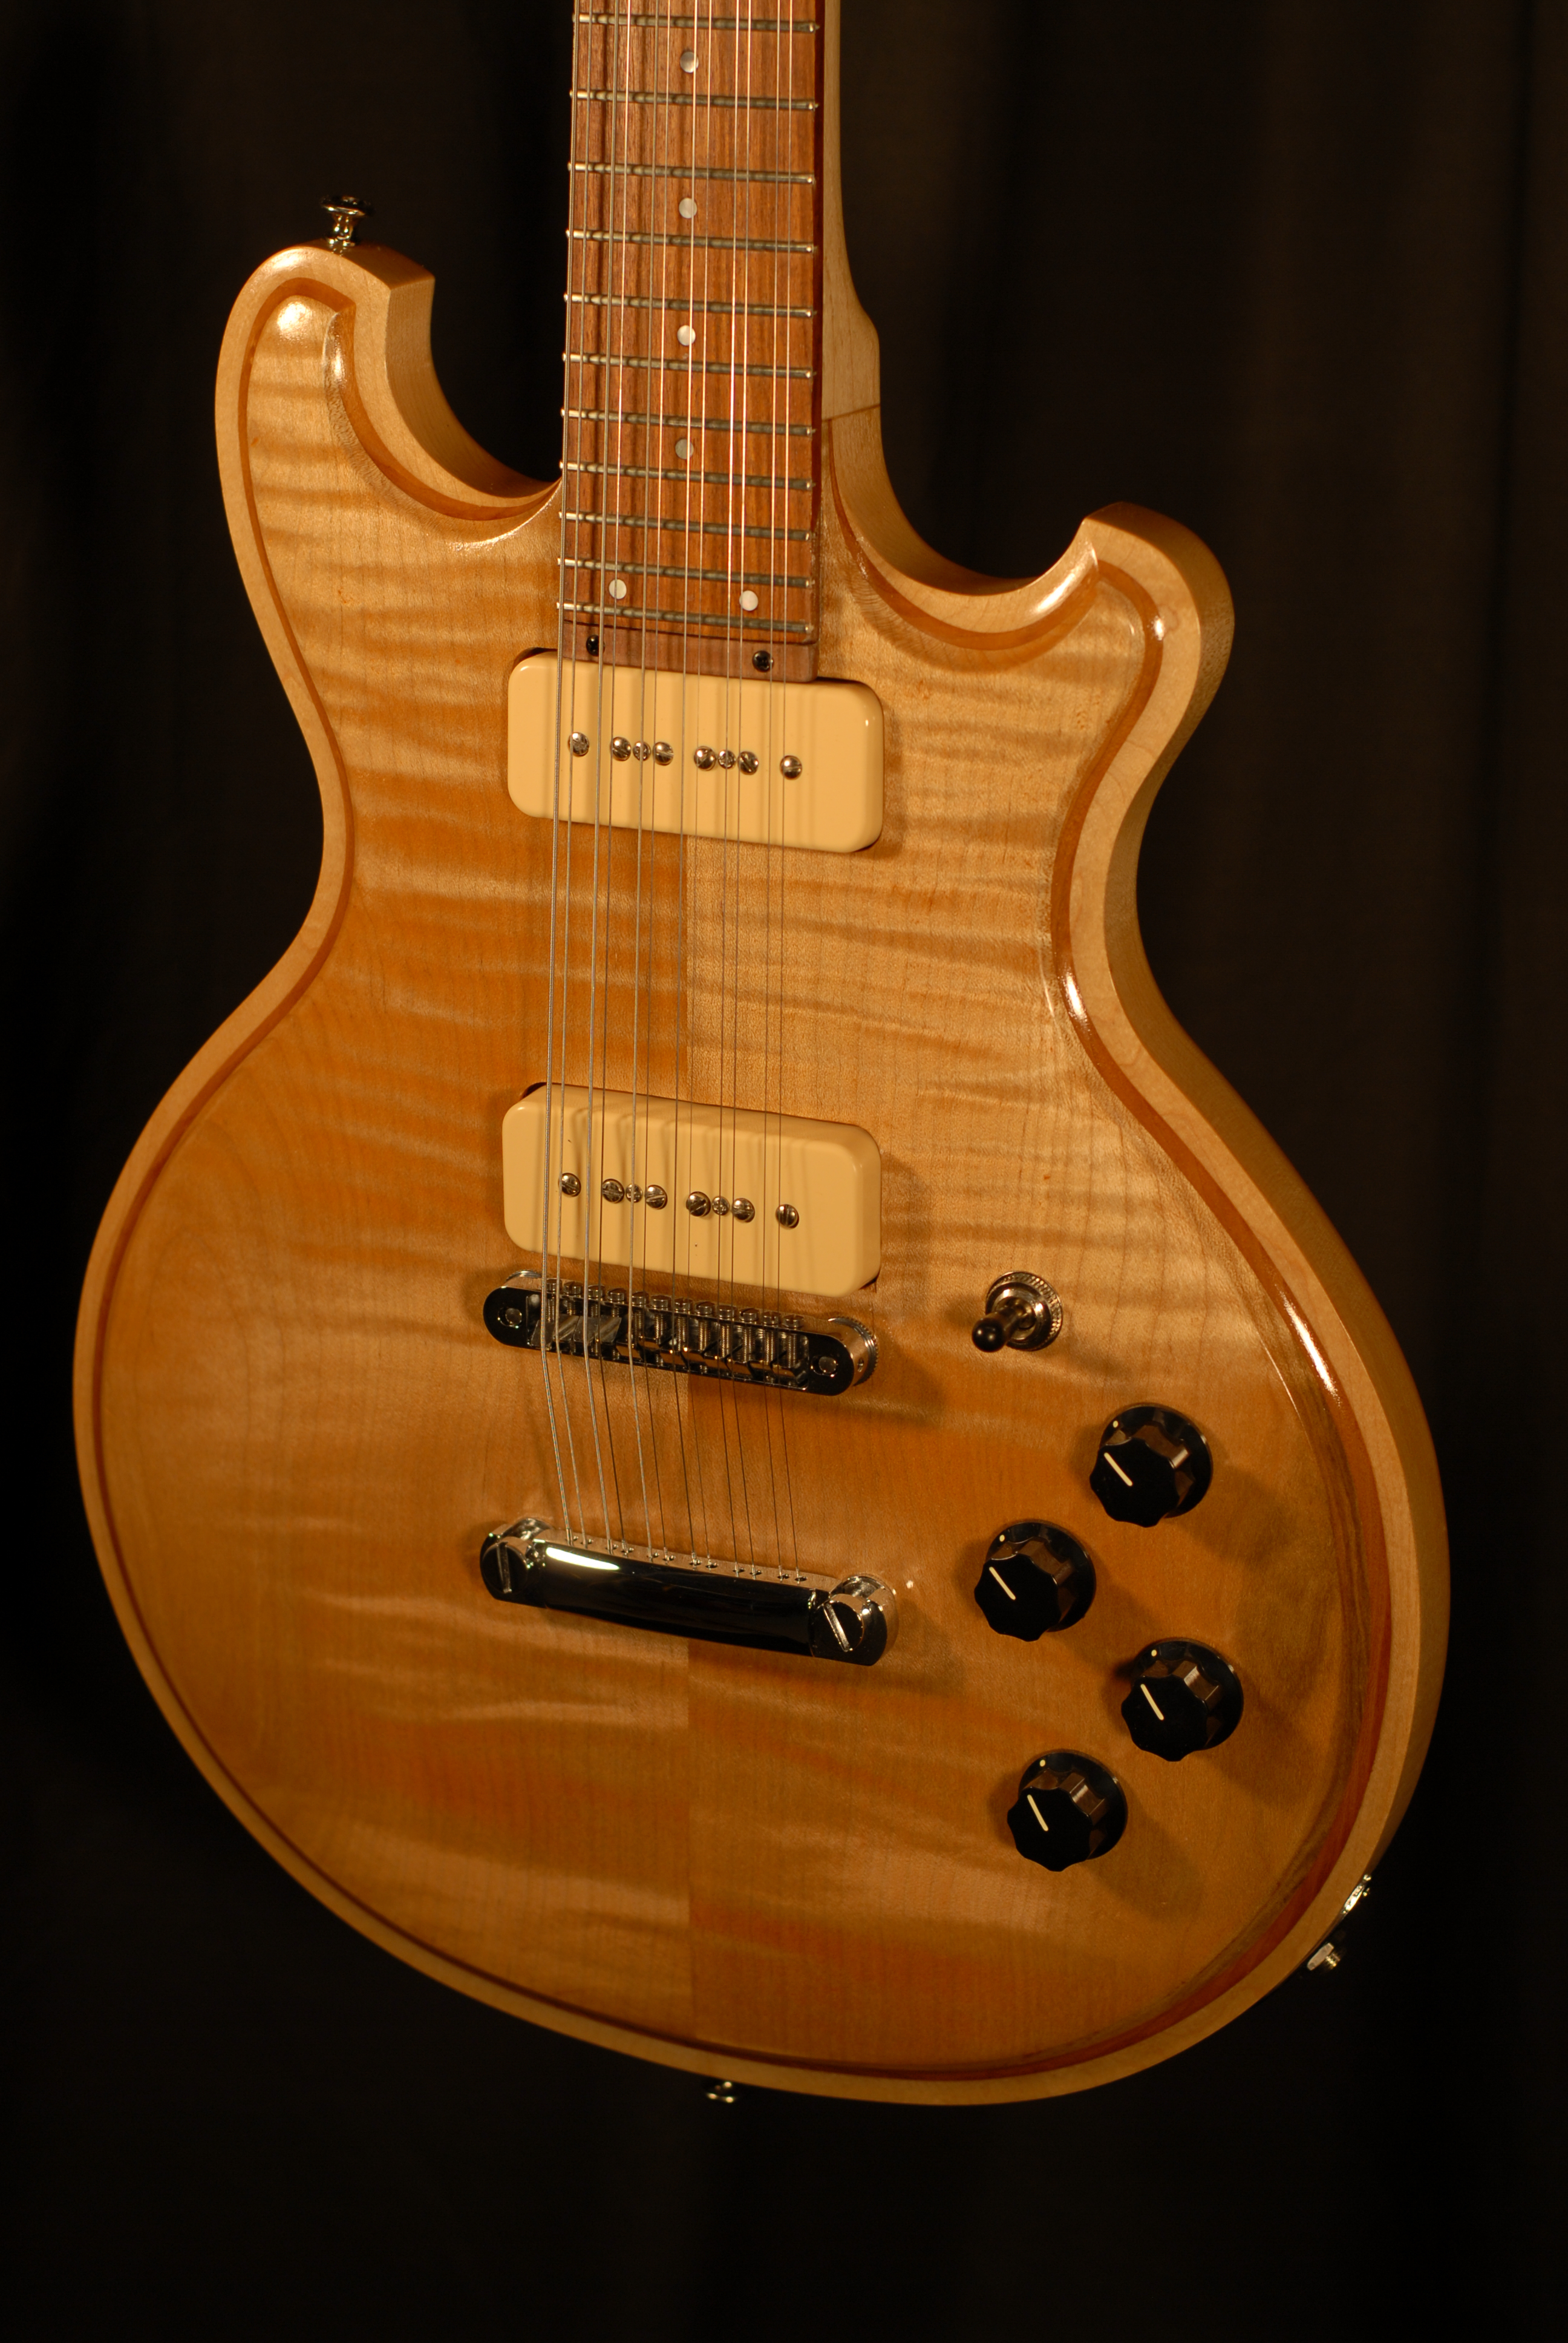 front body view of michael mccarten's double cutaway Electric 12 string guitar model